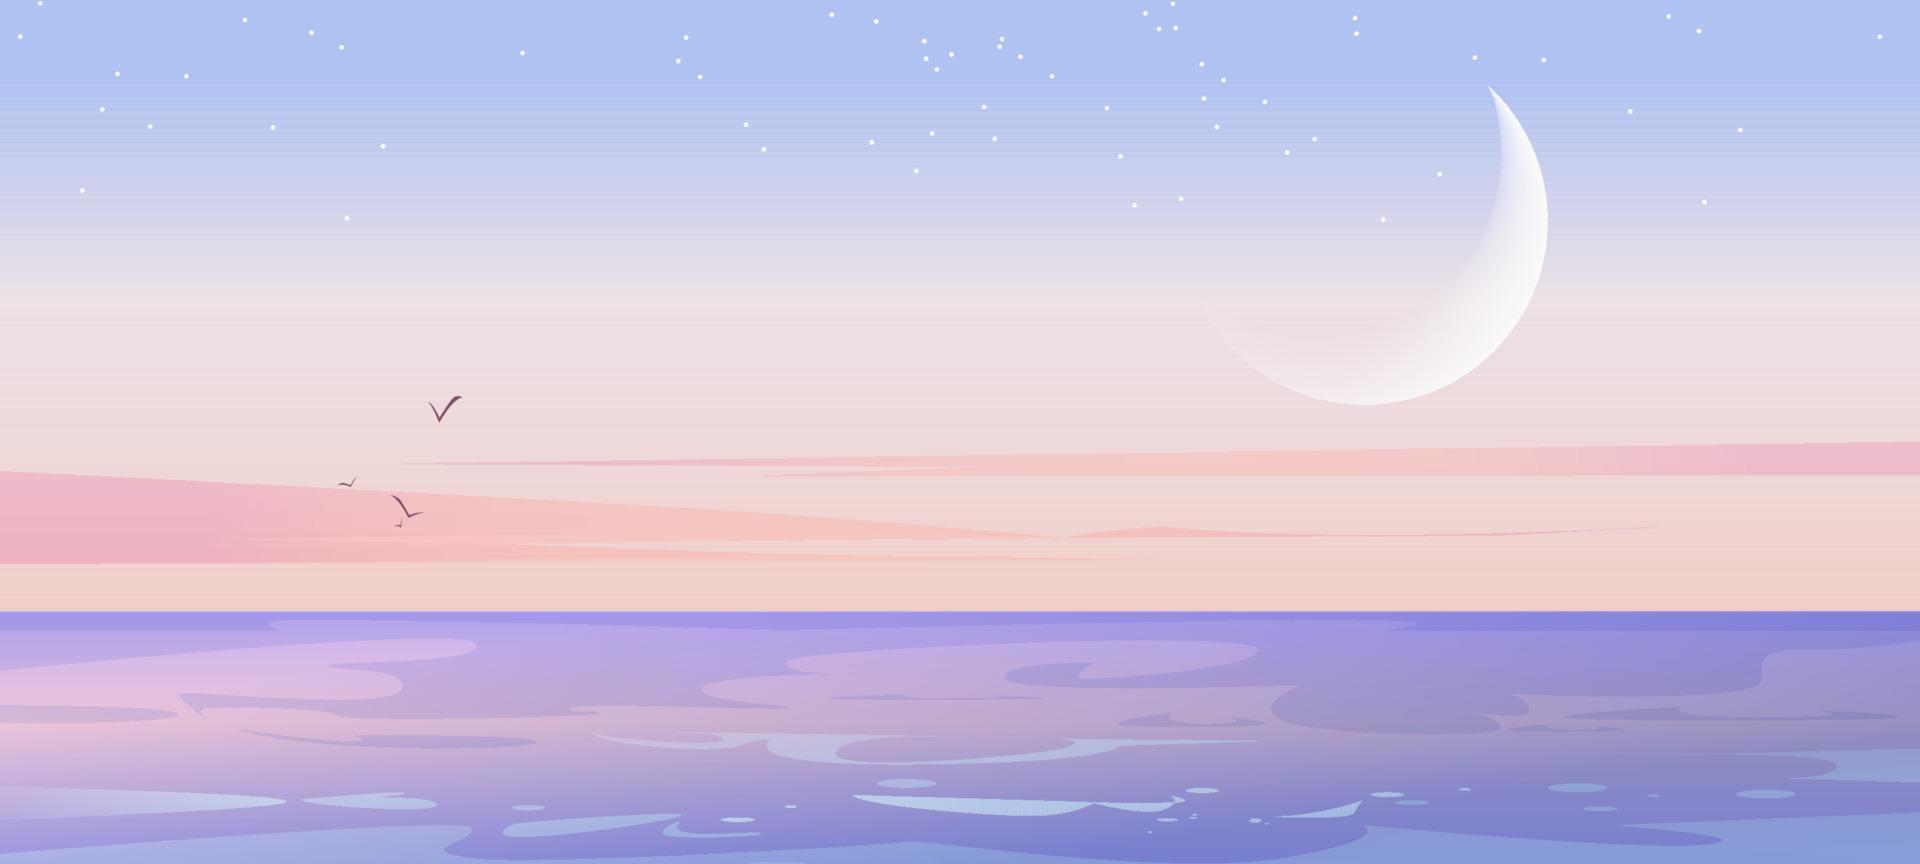 Sea landscape with moon and stars in sky vector